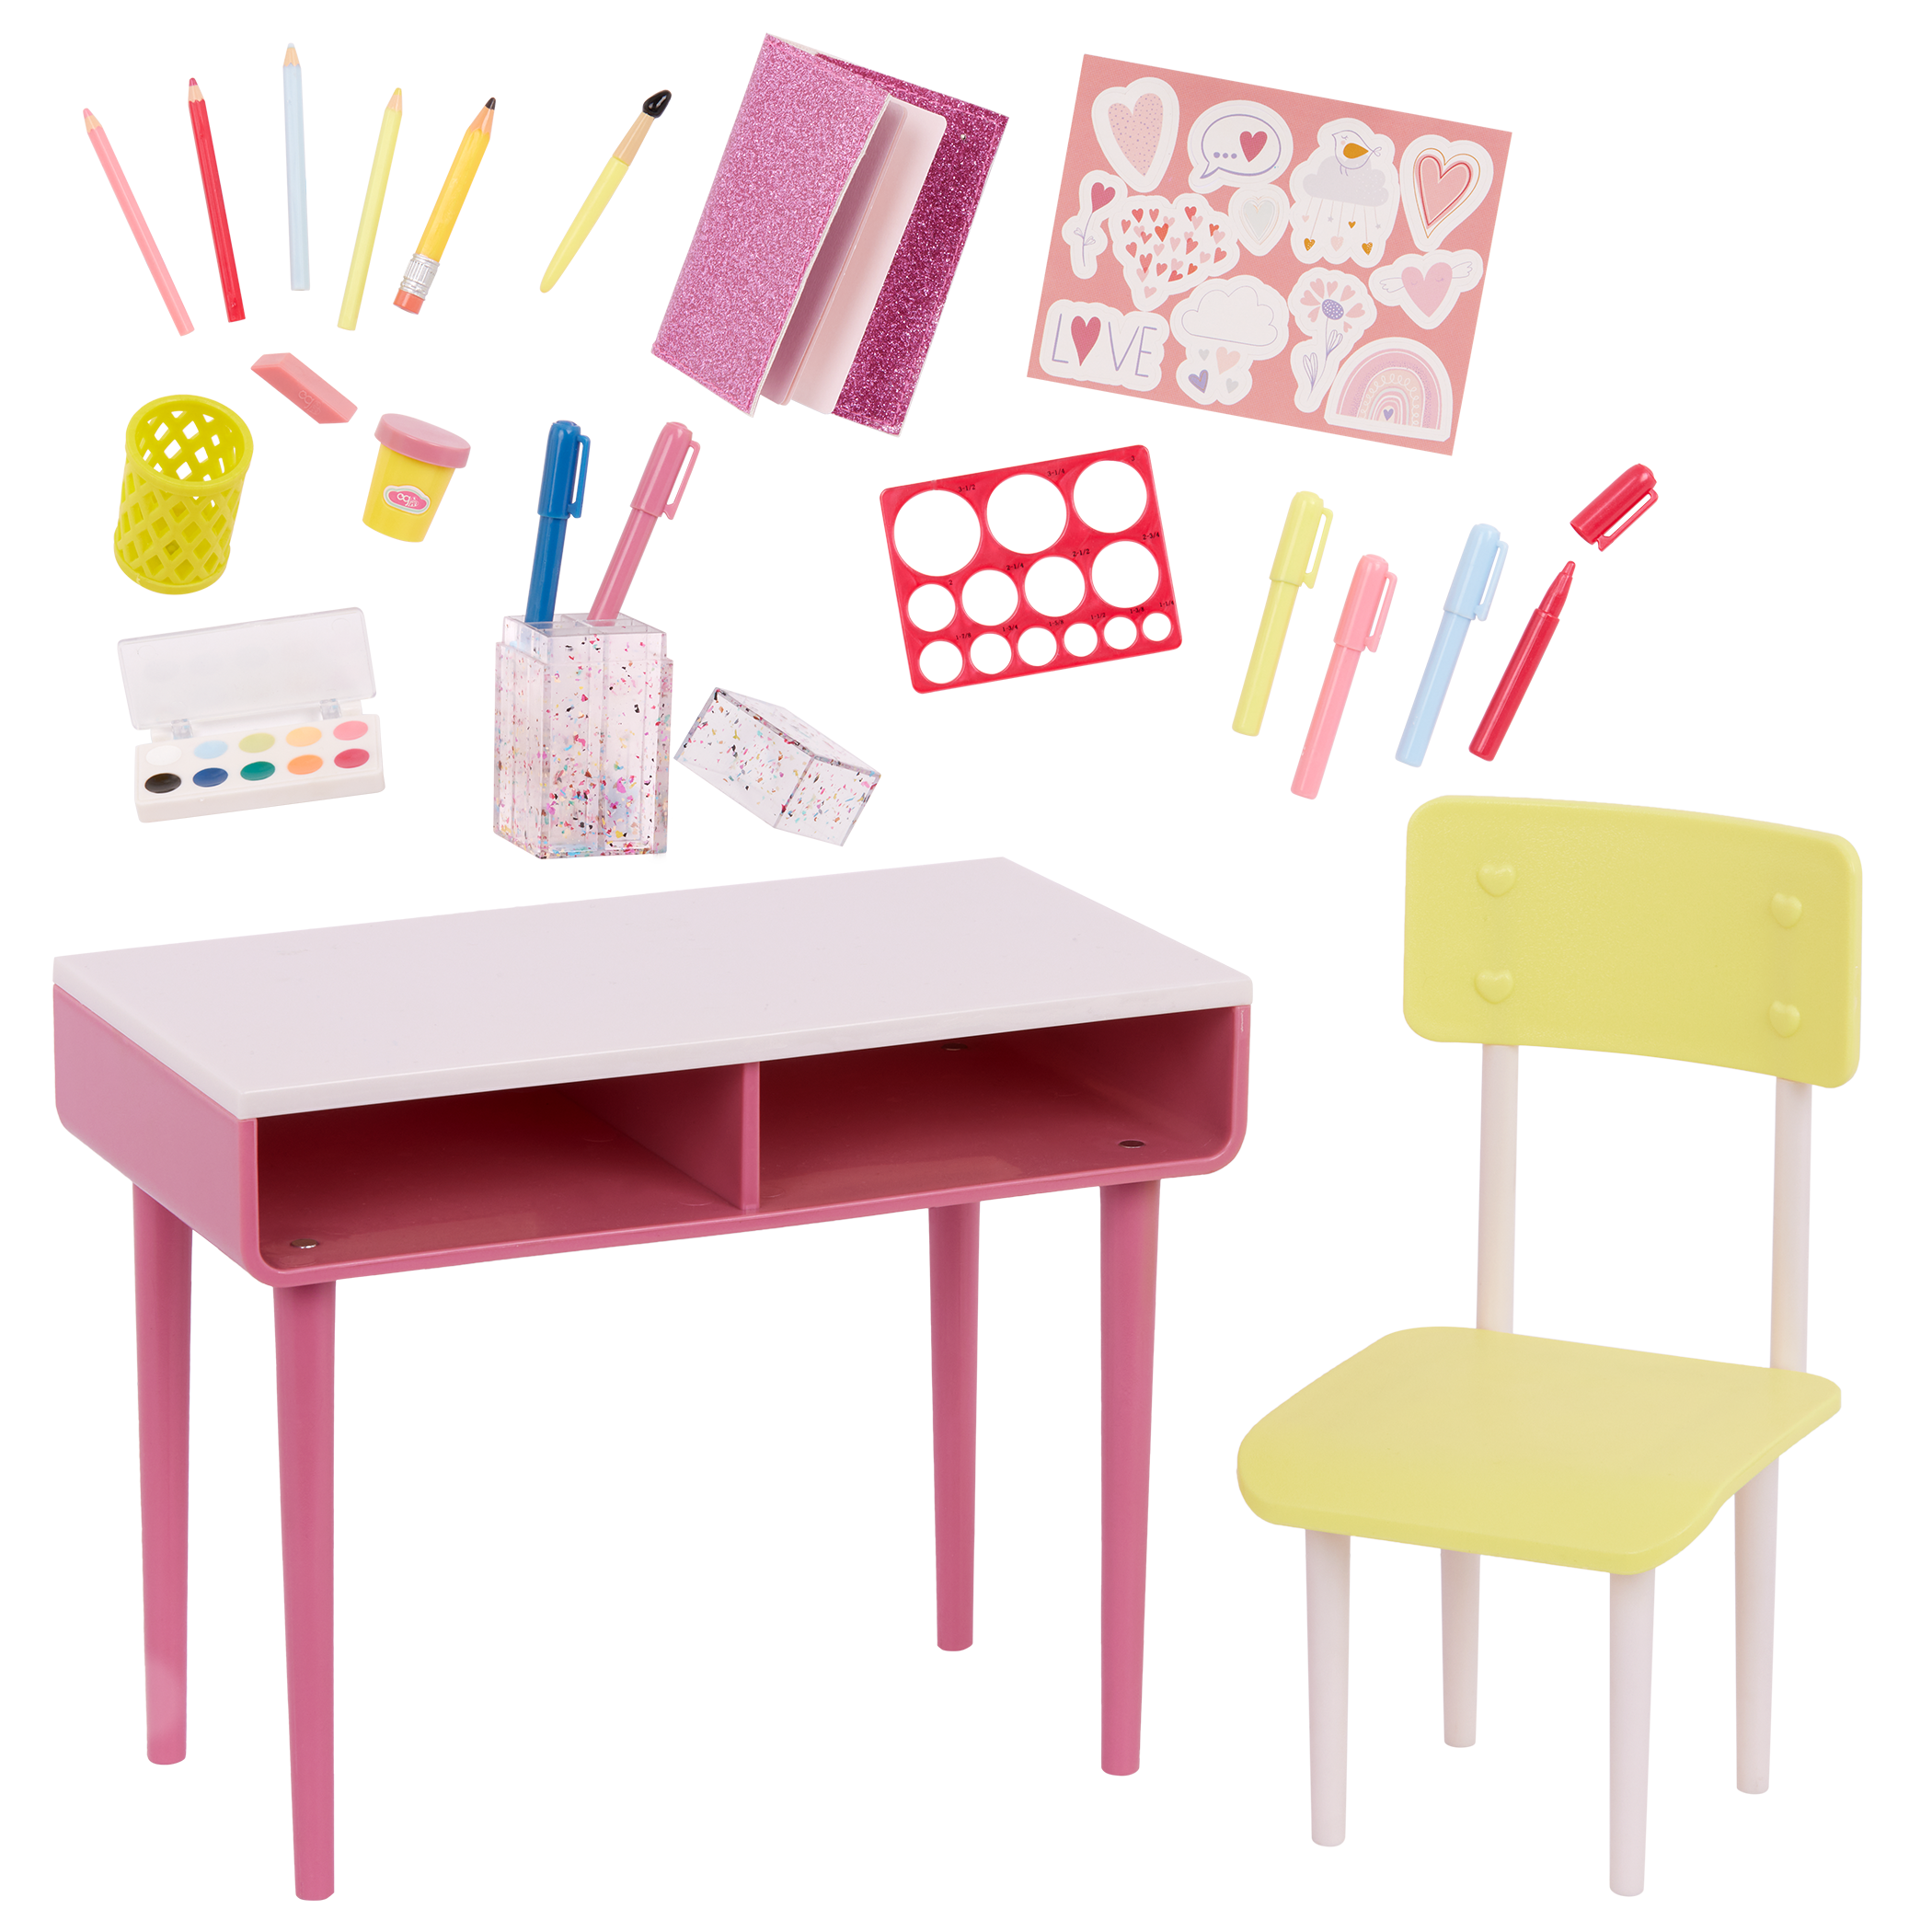 Our Generation Imagination Station Desk Set for 18 inch Dolls with accessories 